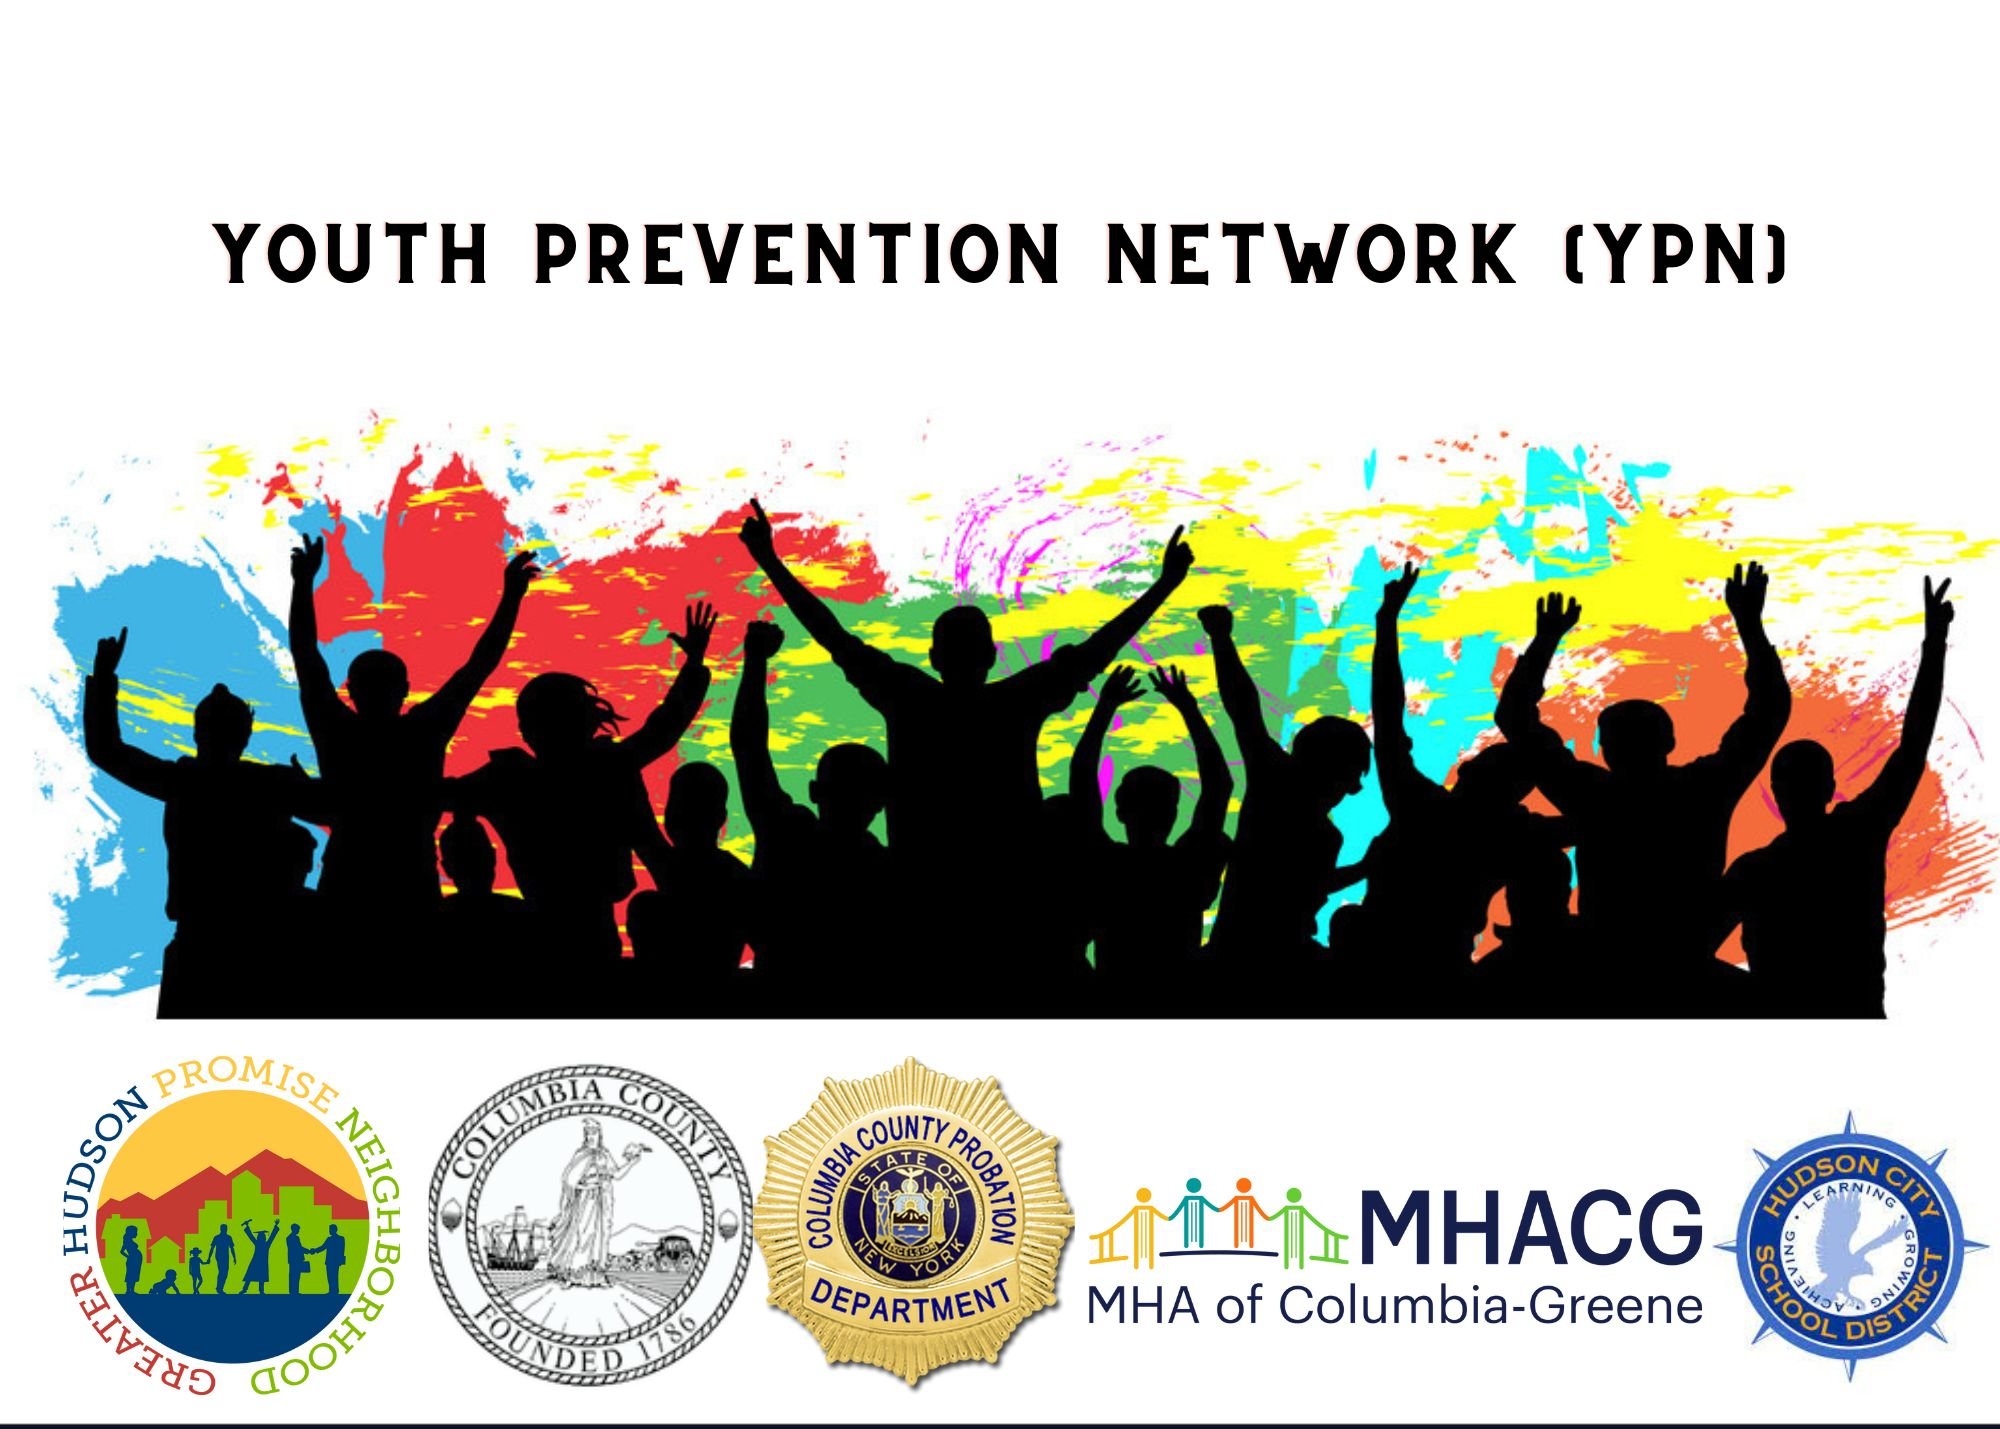 Copy of youth prevention network (YPN).jpg